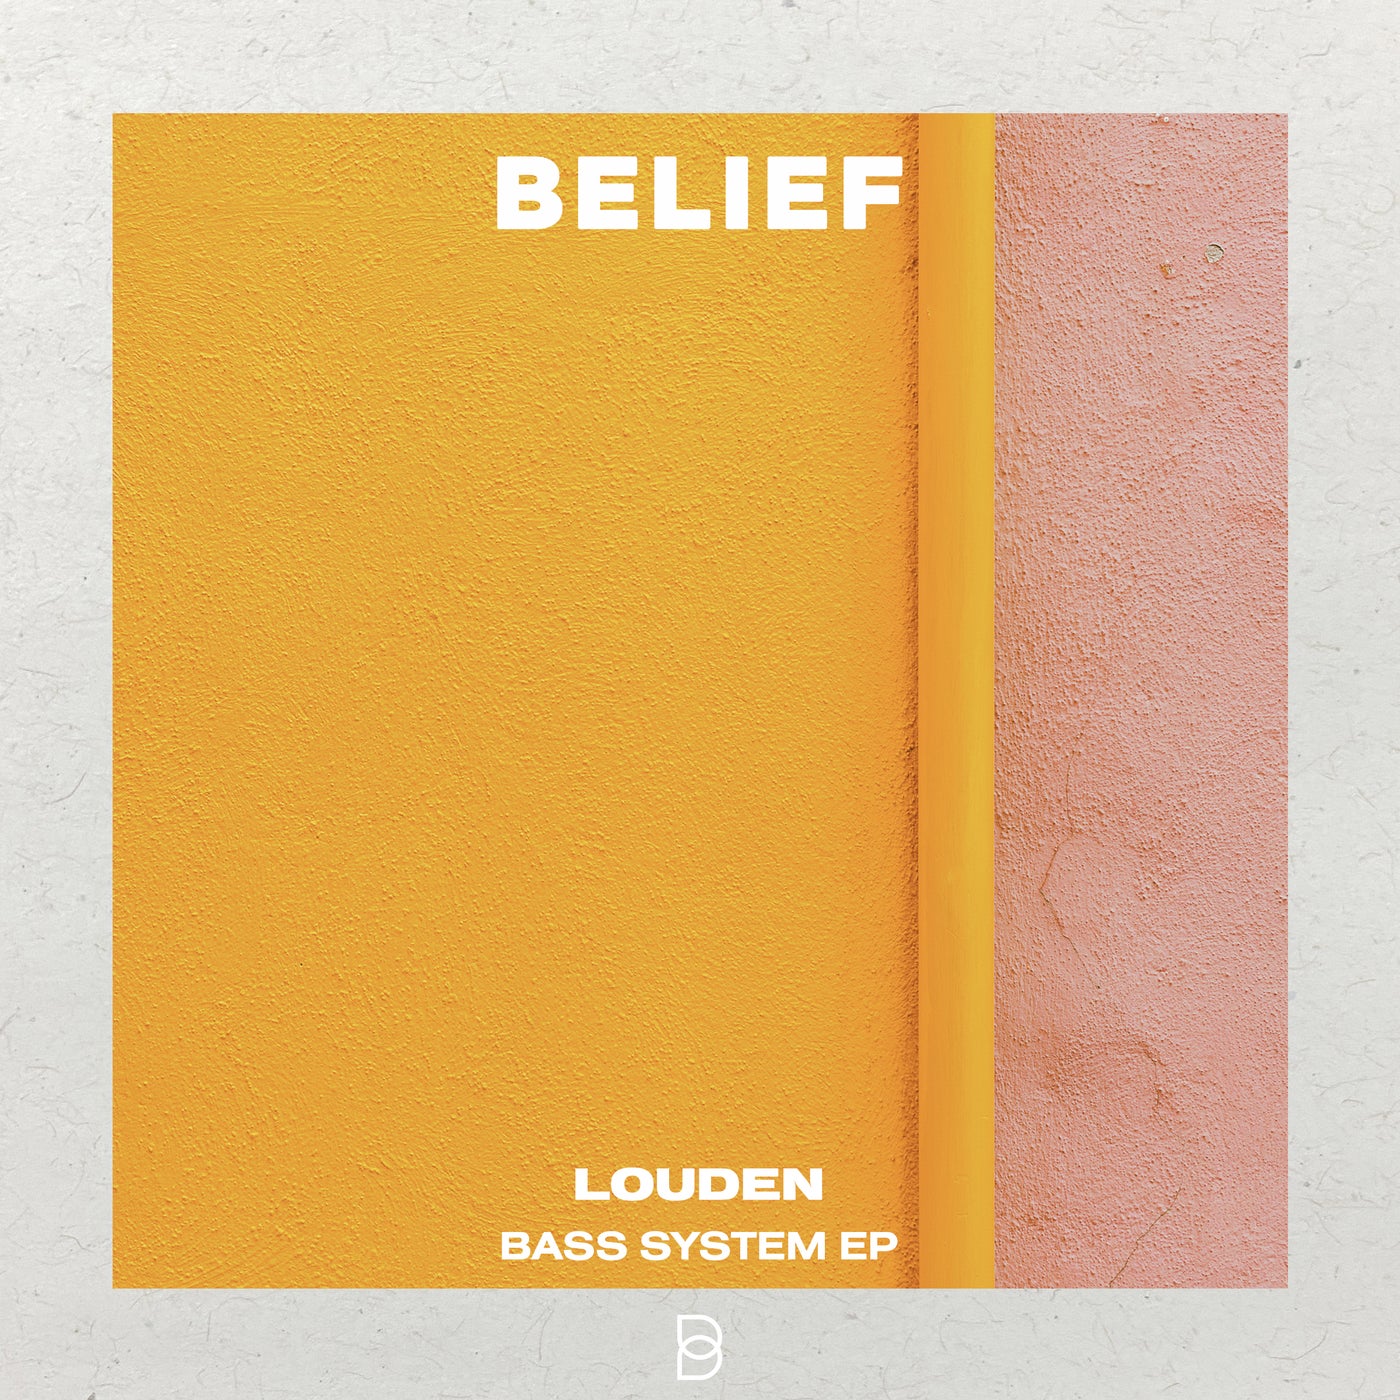 Bass System EP